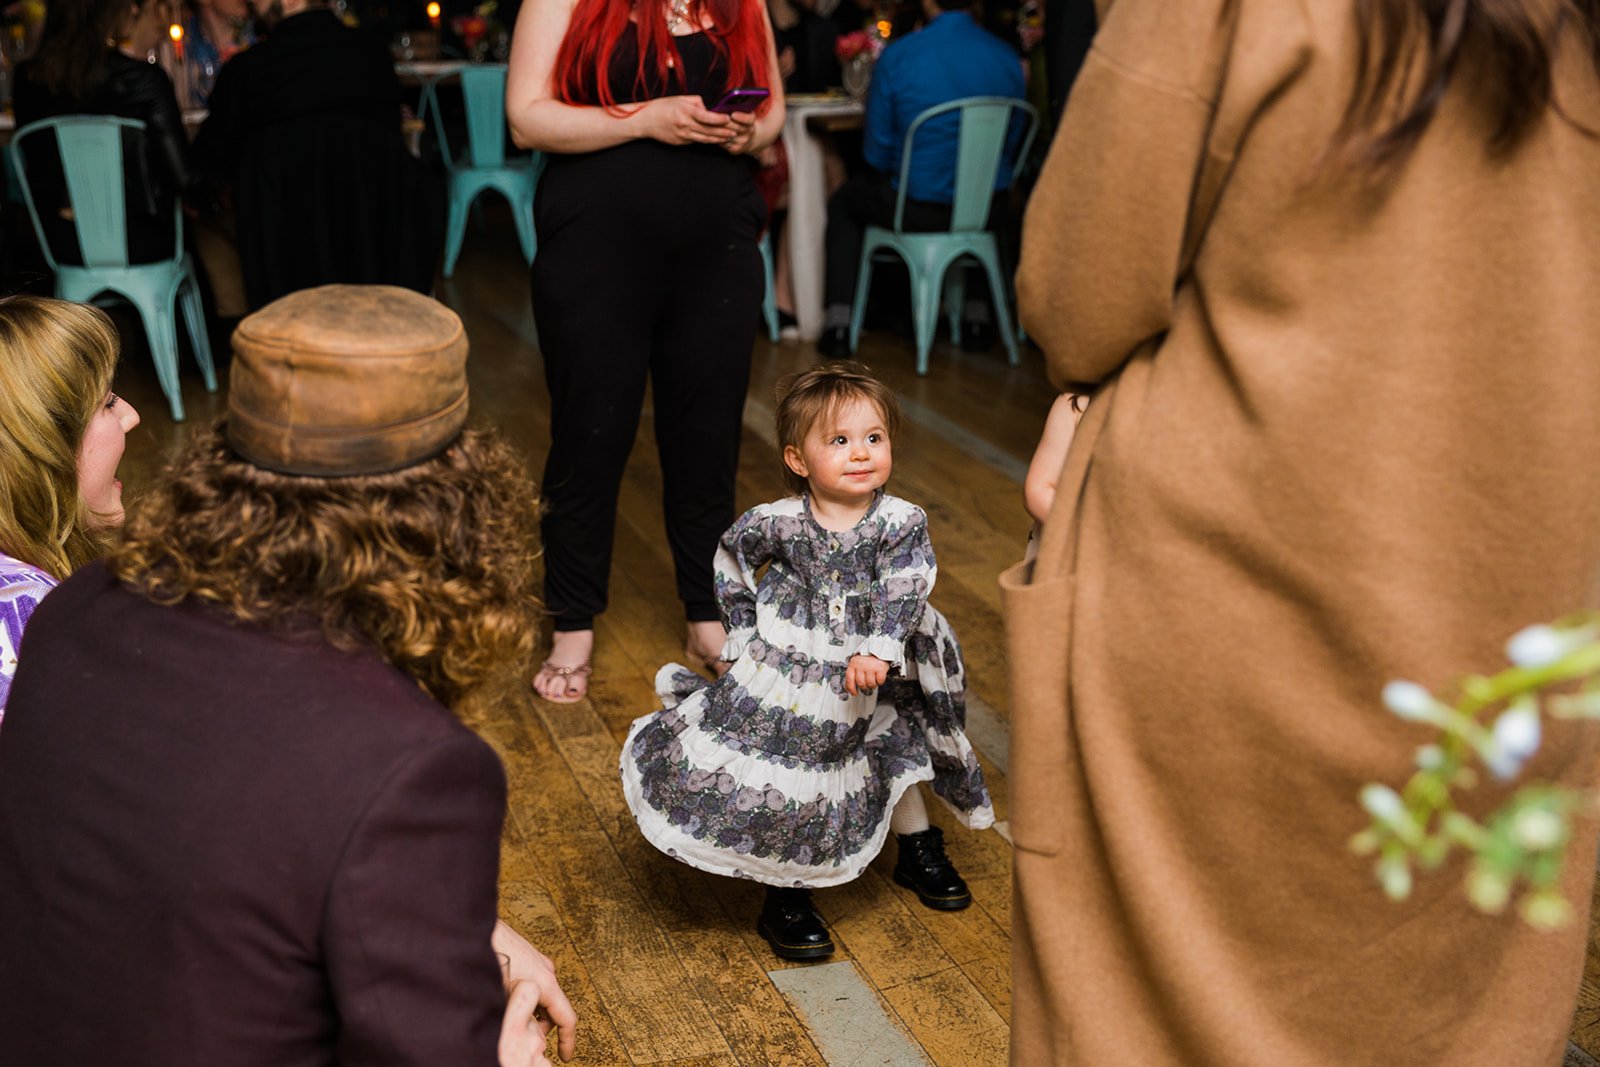  Documentary candid photo of flower girl dancing during the reception at nontraditional Jewish and Venezuelan wedding at The Joinery Chicago an Industrial loft wedding venue In Logan Square.  